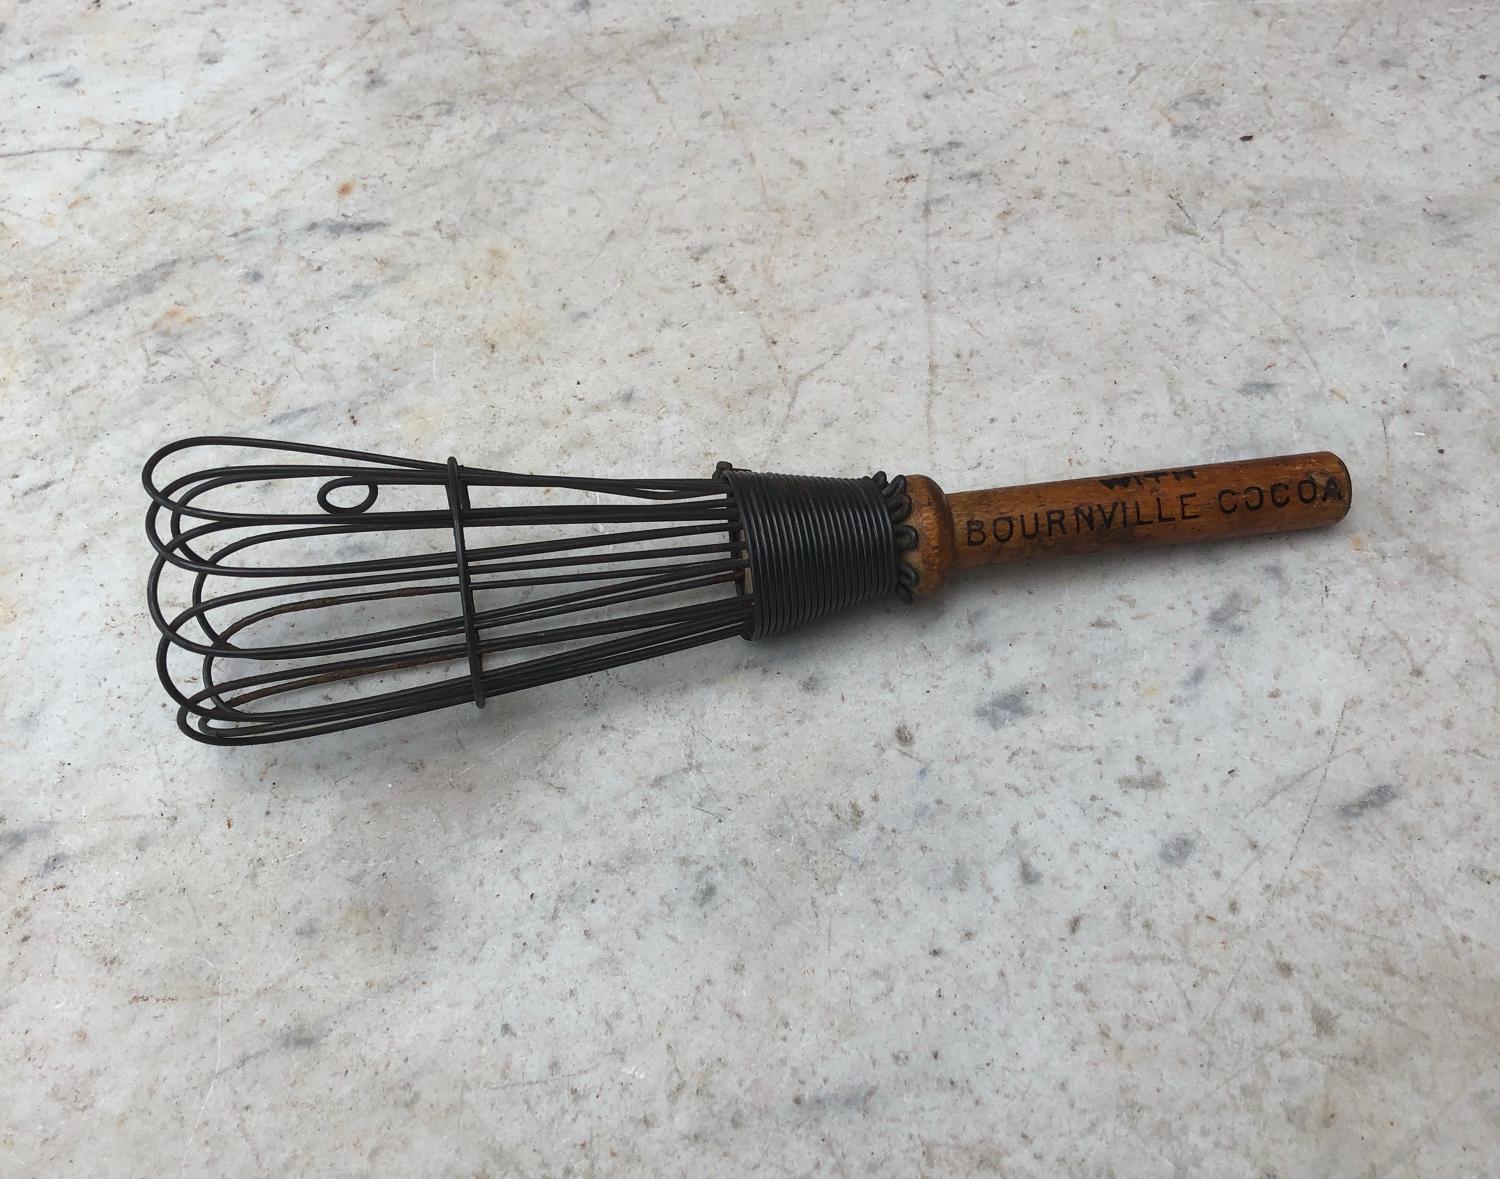 Antique Advertising Whisk - Bournville Cocoa